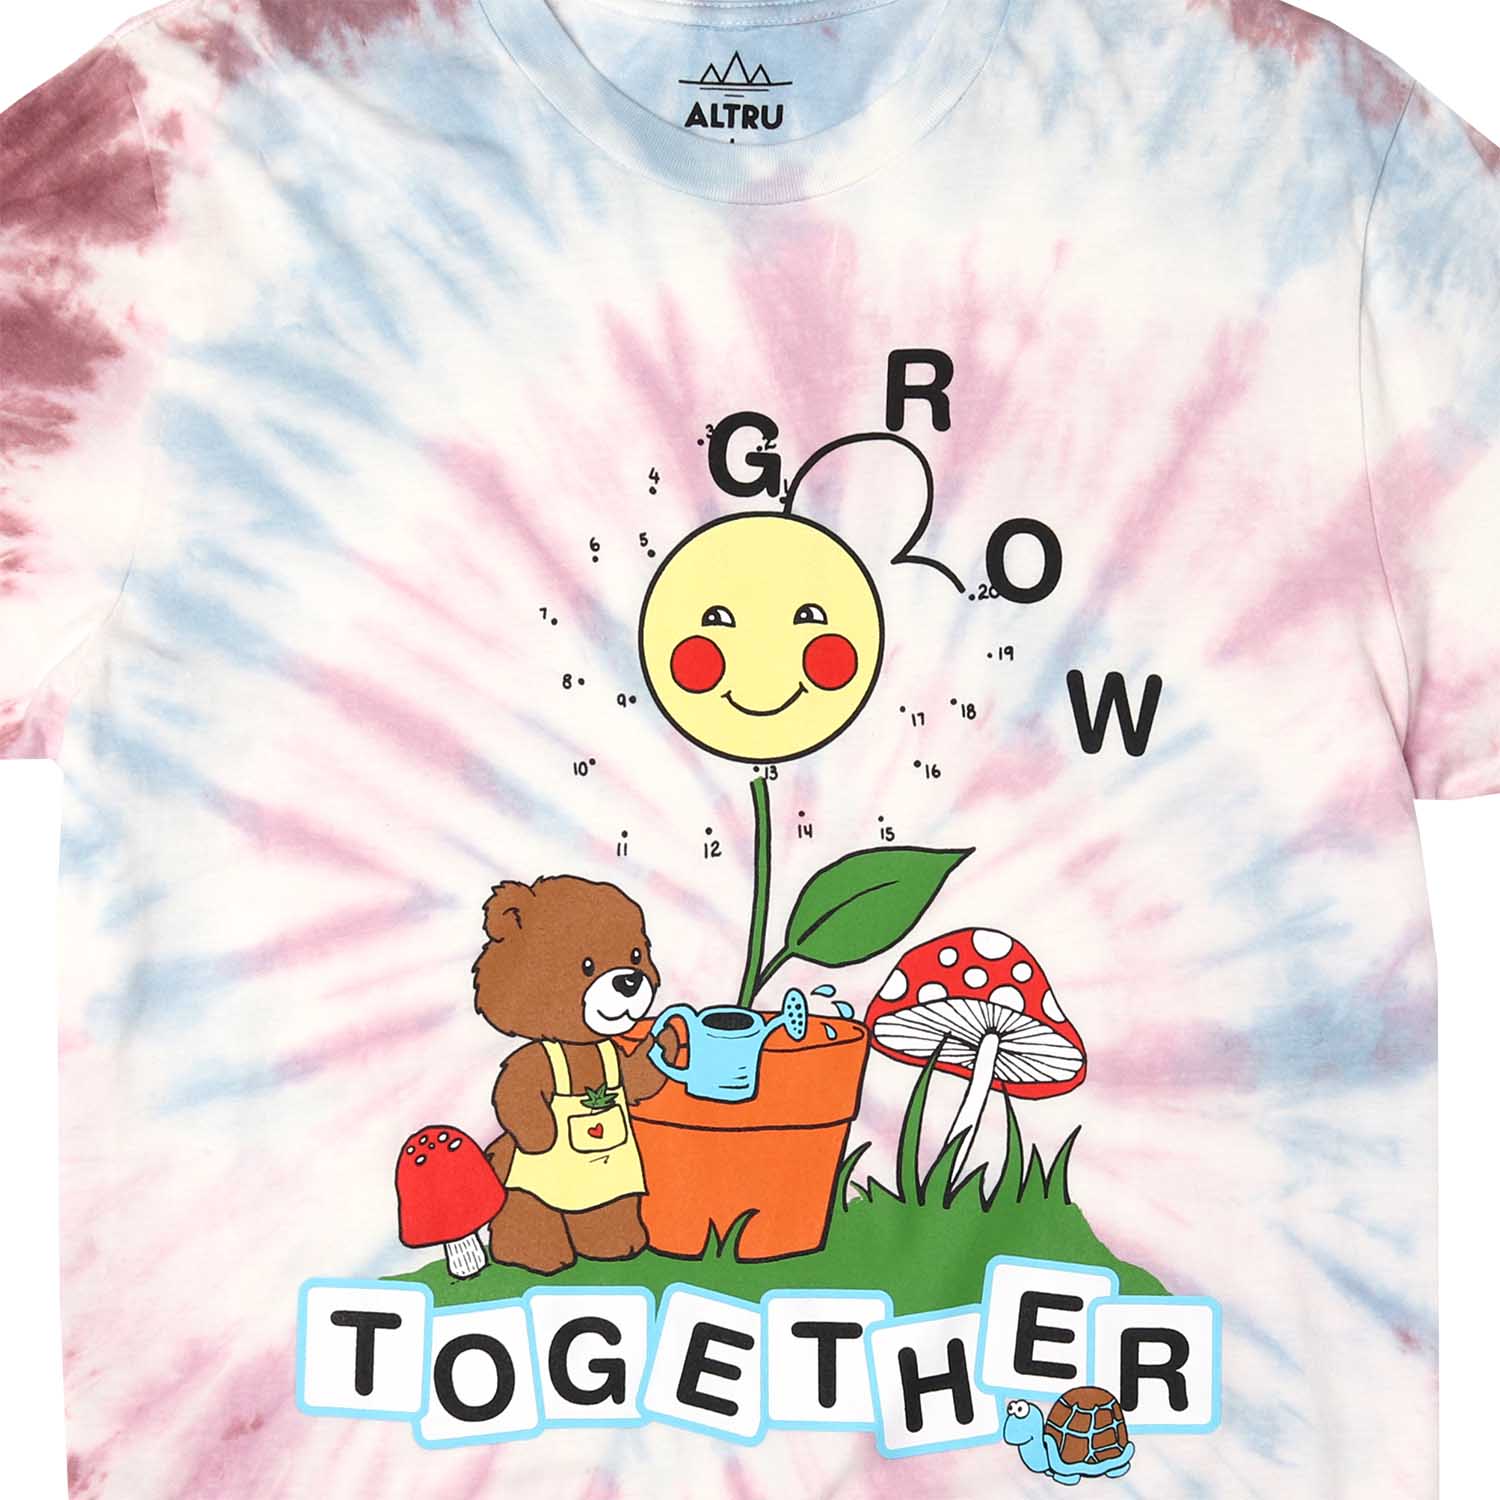 Front of tie dye tee with graphic of a teddy bear garden with mushrooms